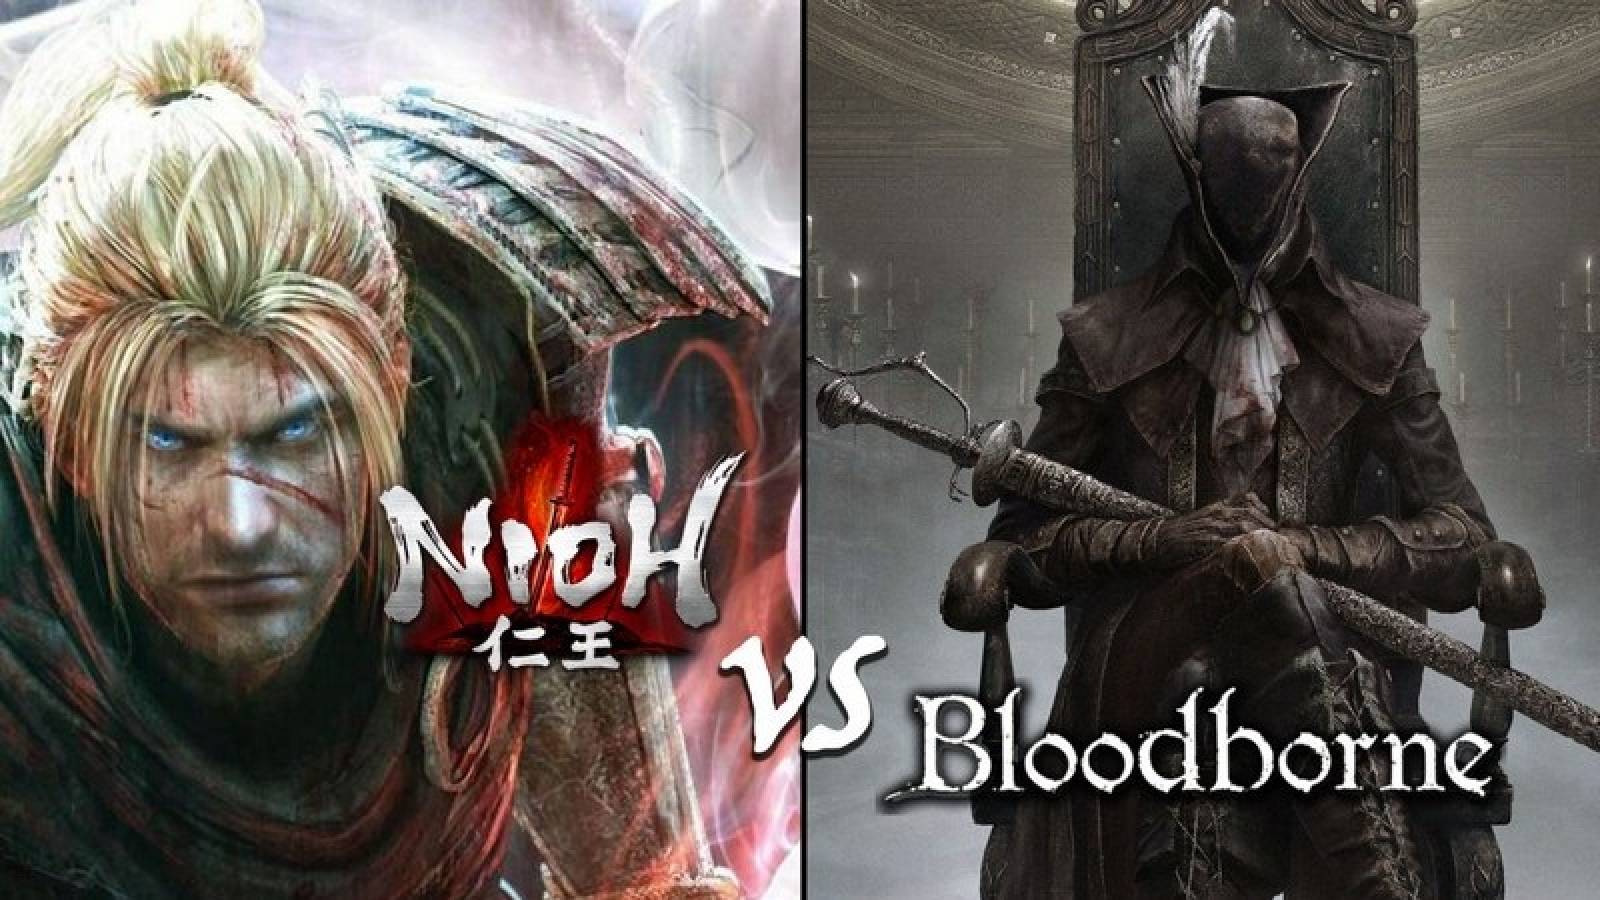 Dark Souls Clone: The difference between Nioh and Bloodborne